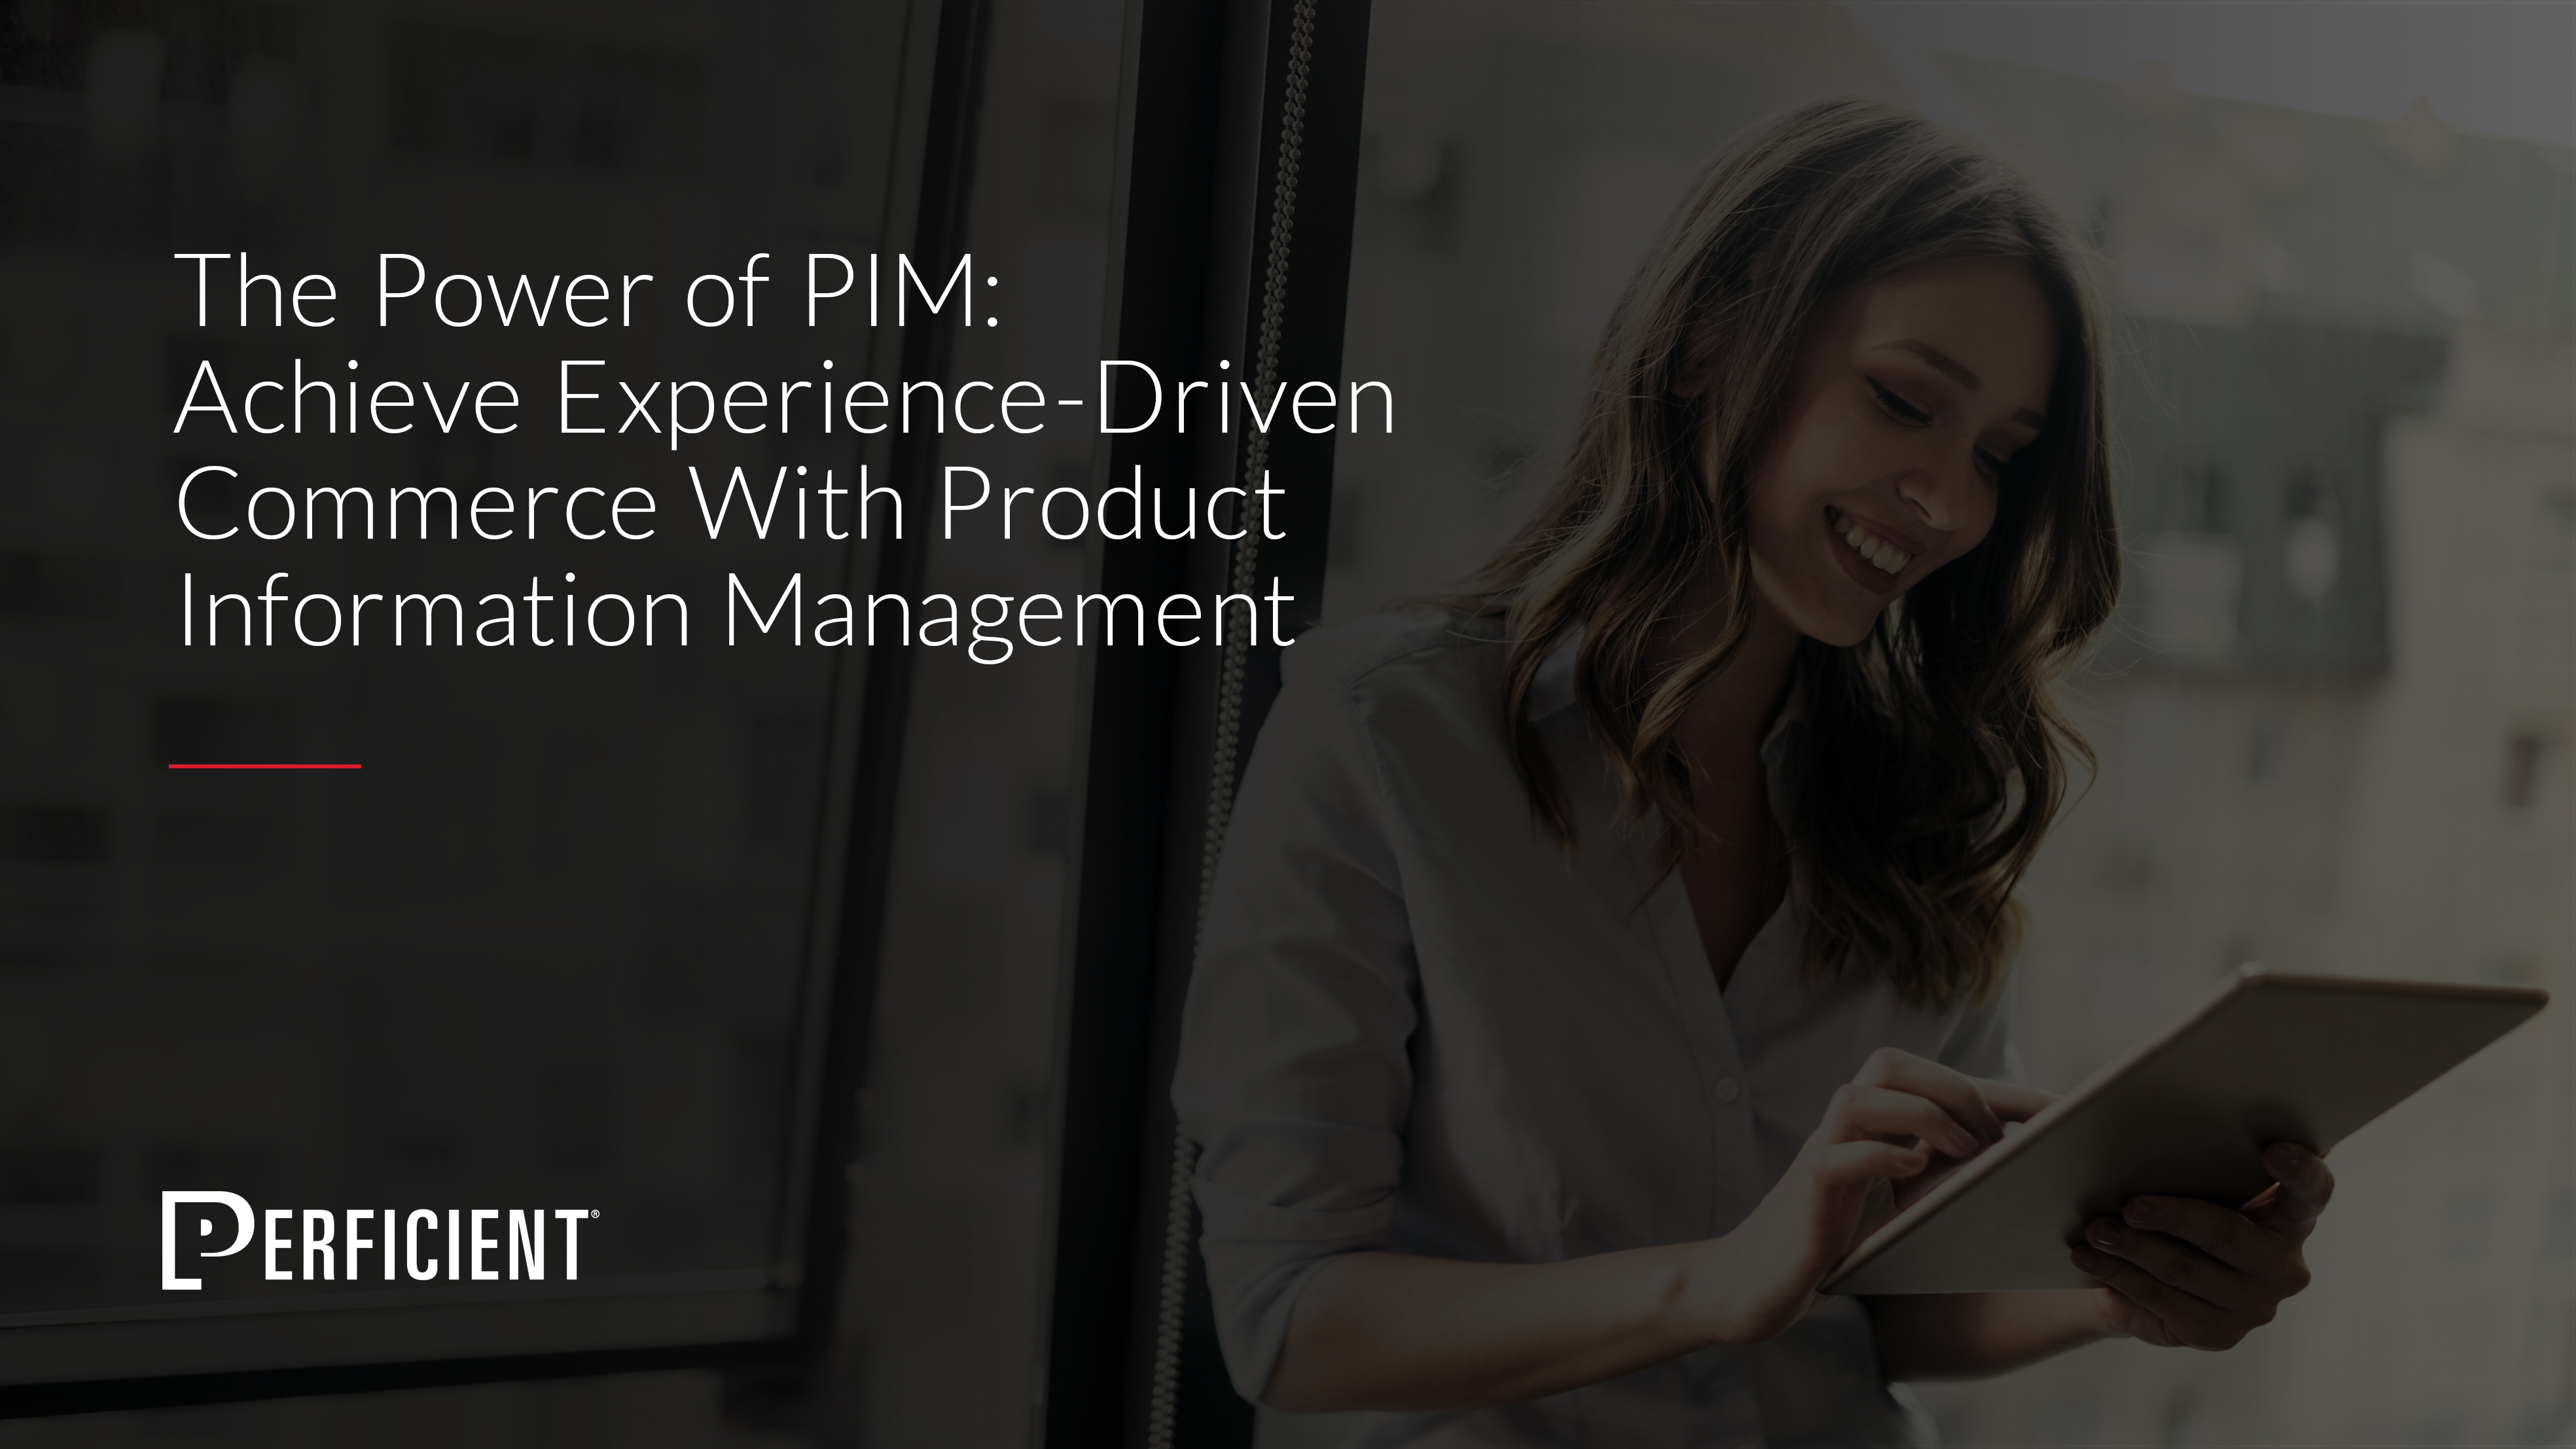 PIM and Experience-Driven Commerce Guide Cover